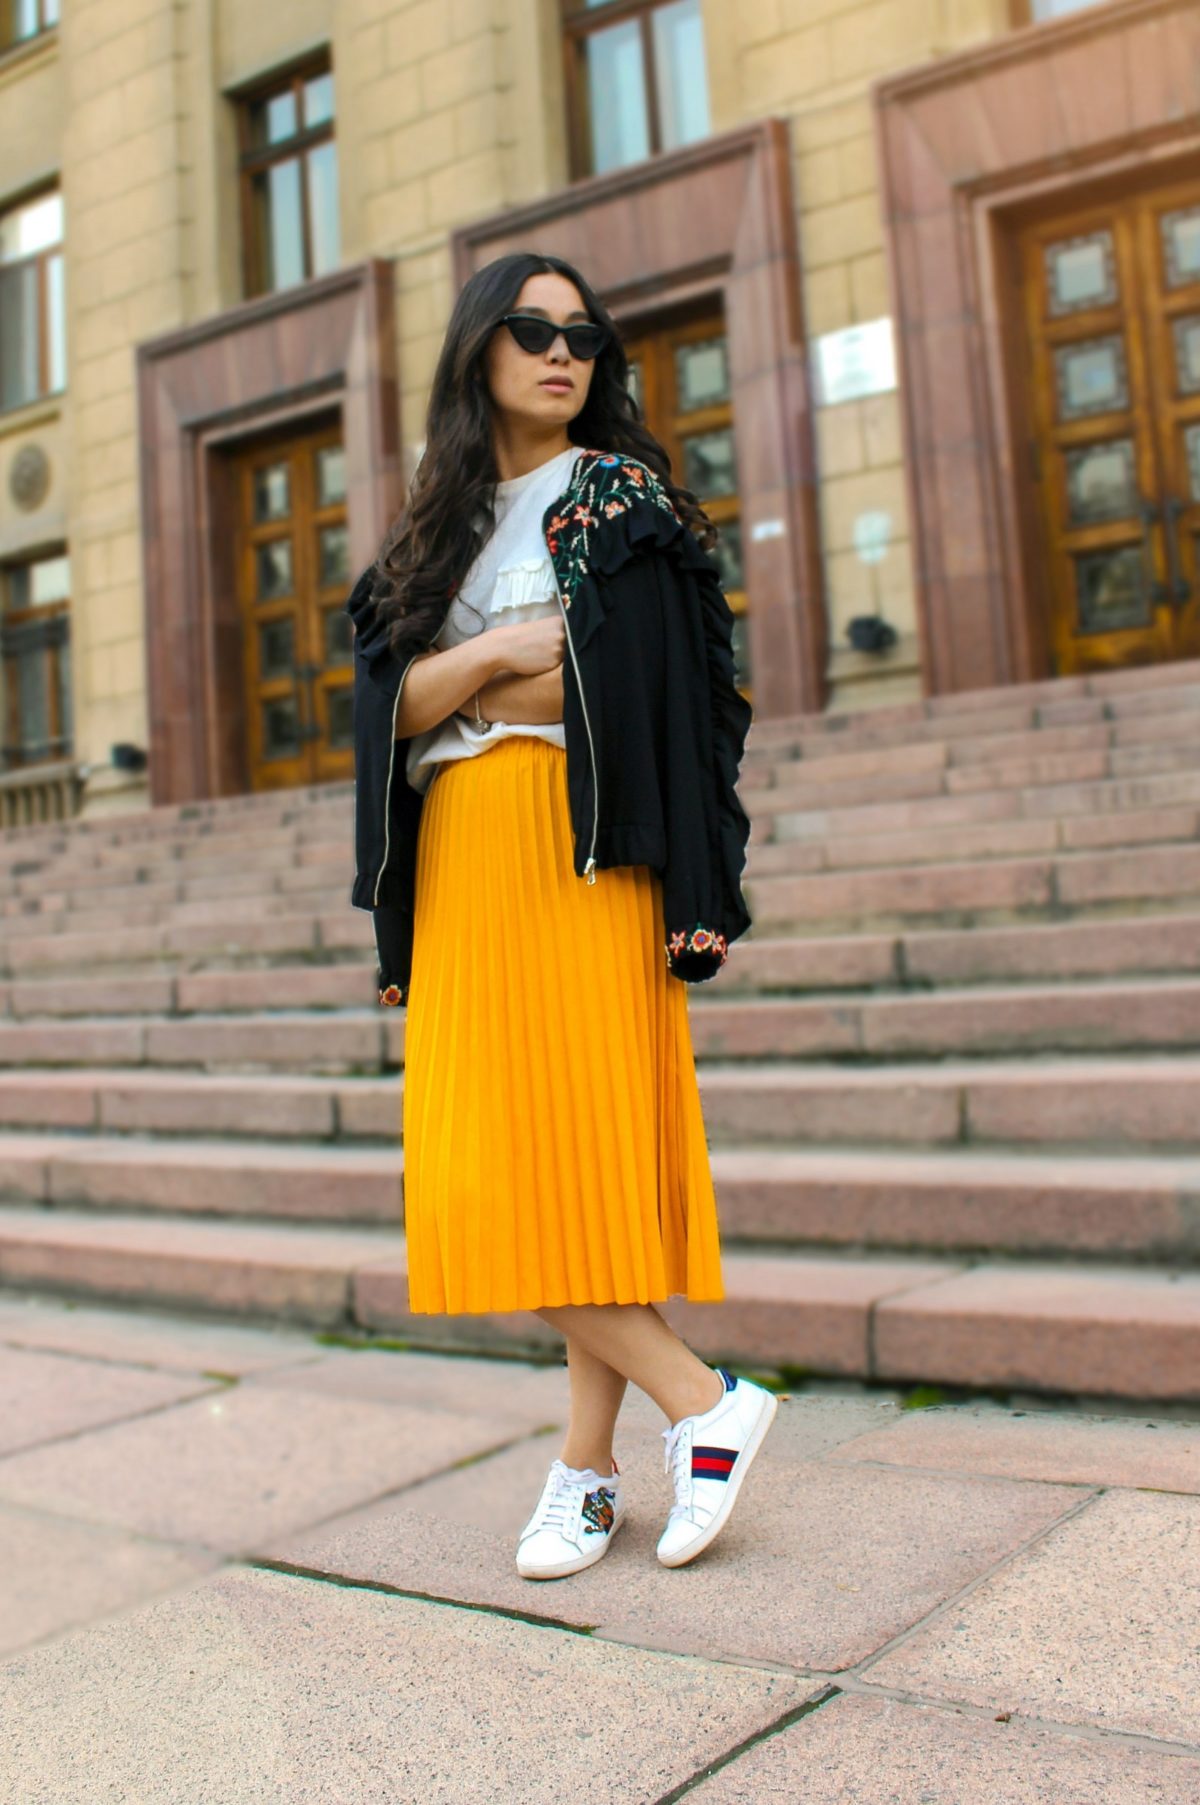 pleated skirt with trainers and jacket outfit casual style